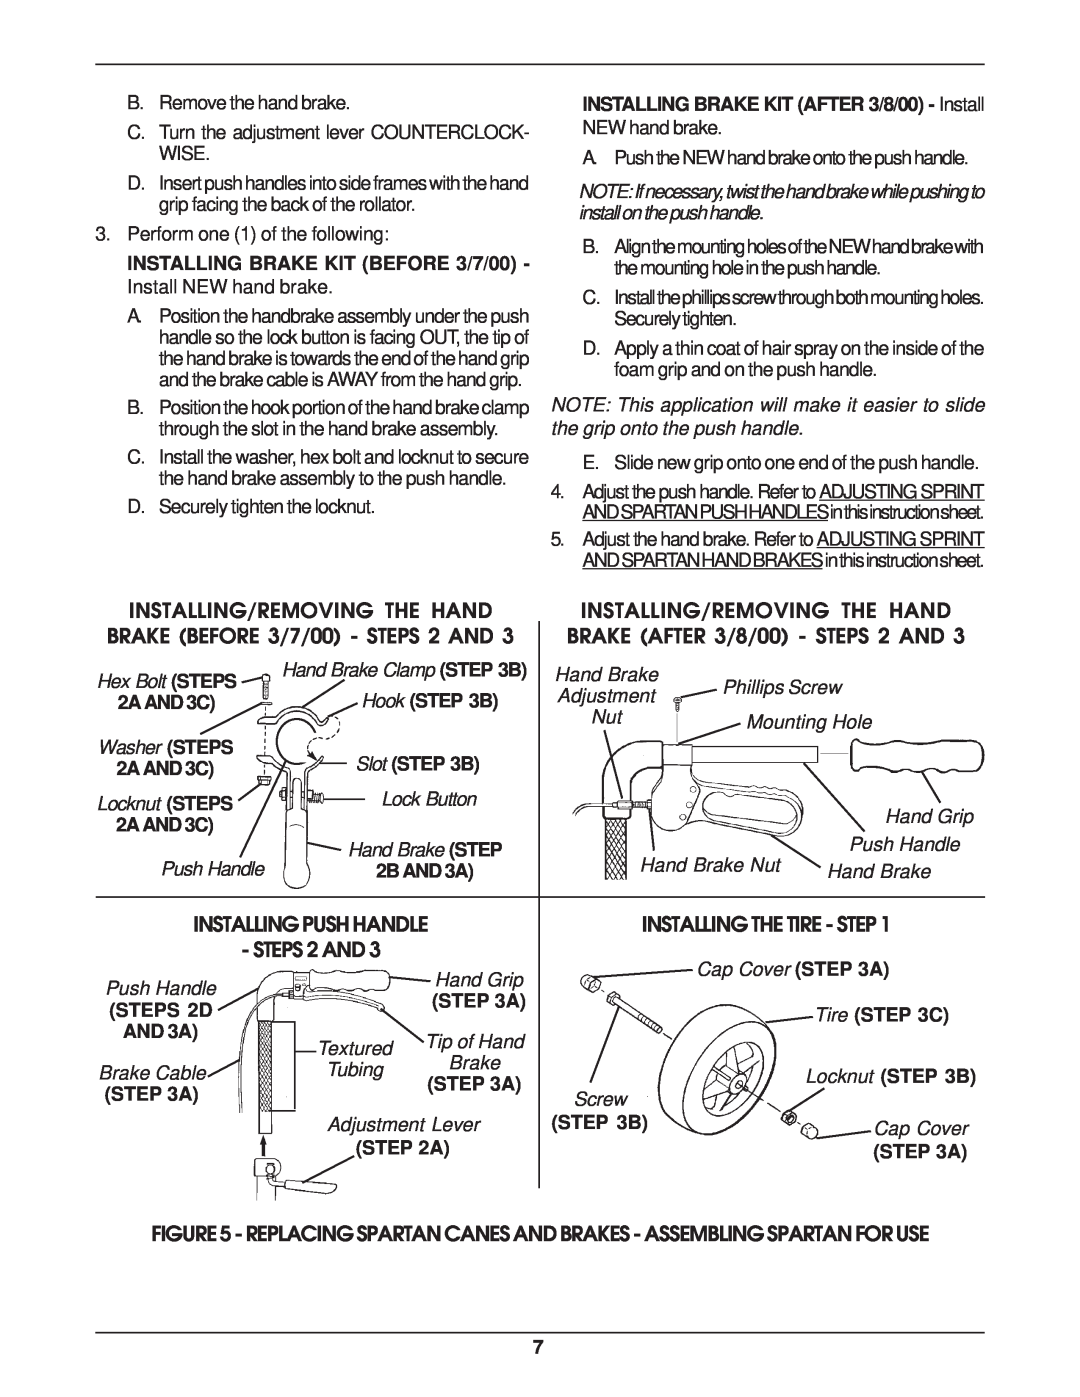 Invacare 65420 Installing/Removing The Hand, BRAKE AFTER 3/8/00 - STEPS 2 AND, Installing The Tire - Step, Slot B, Tire C 